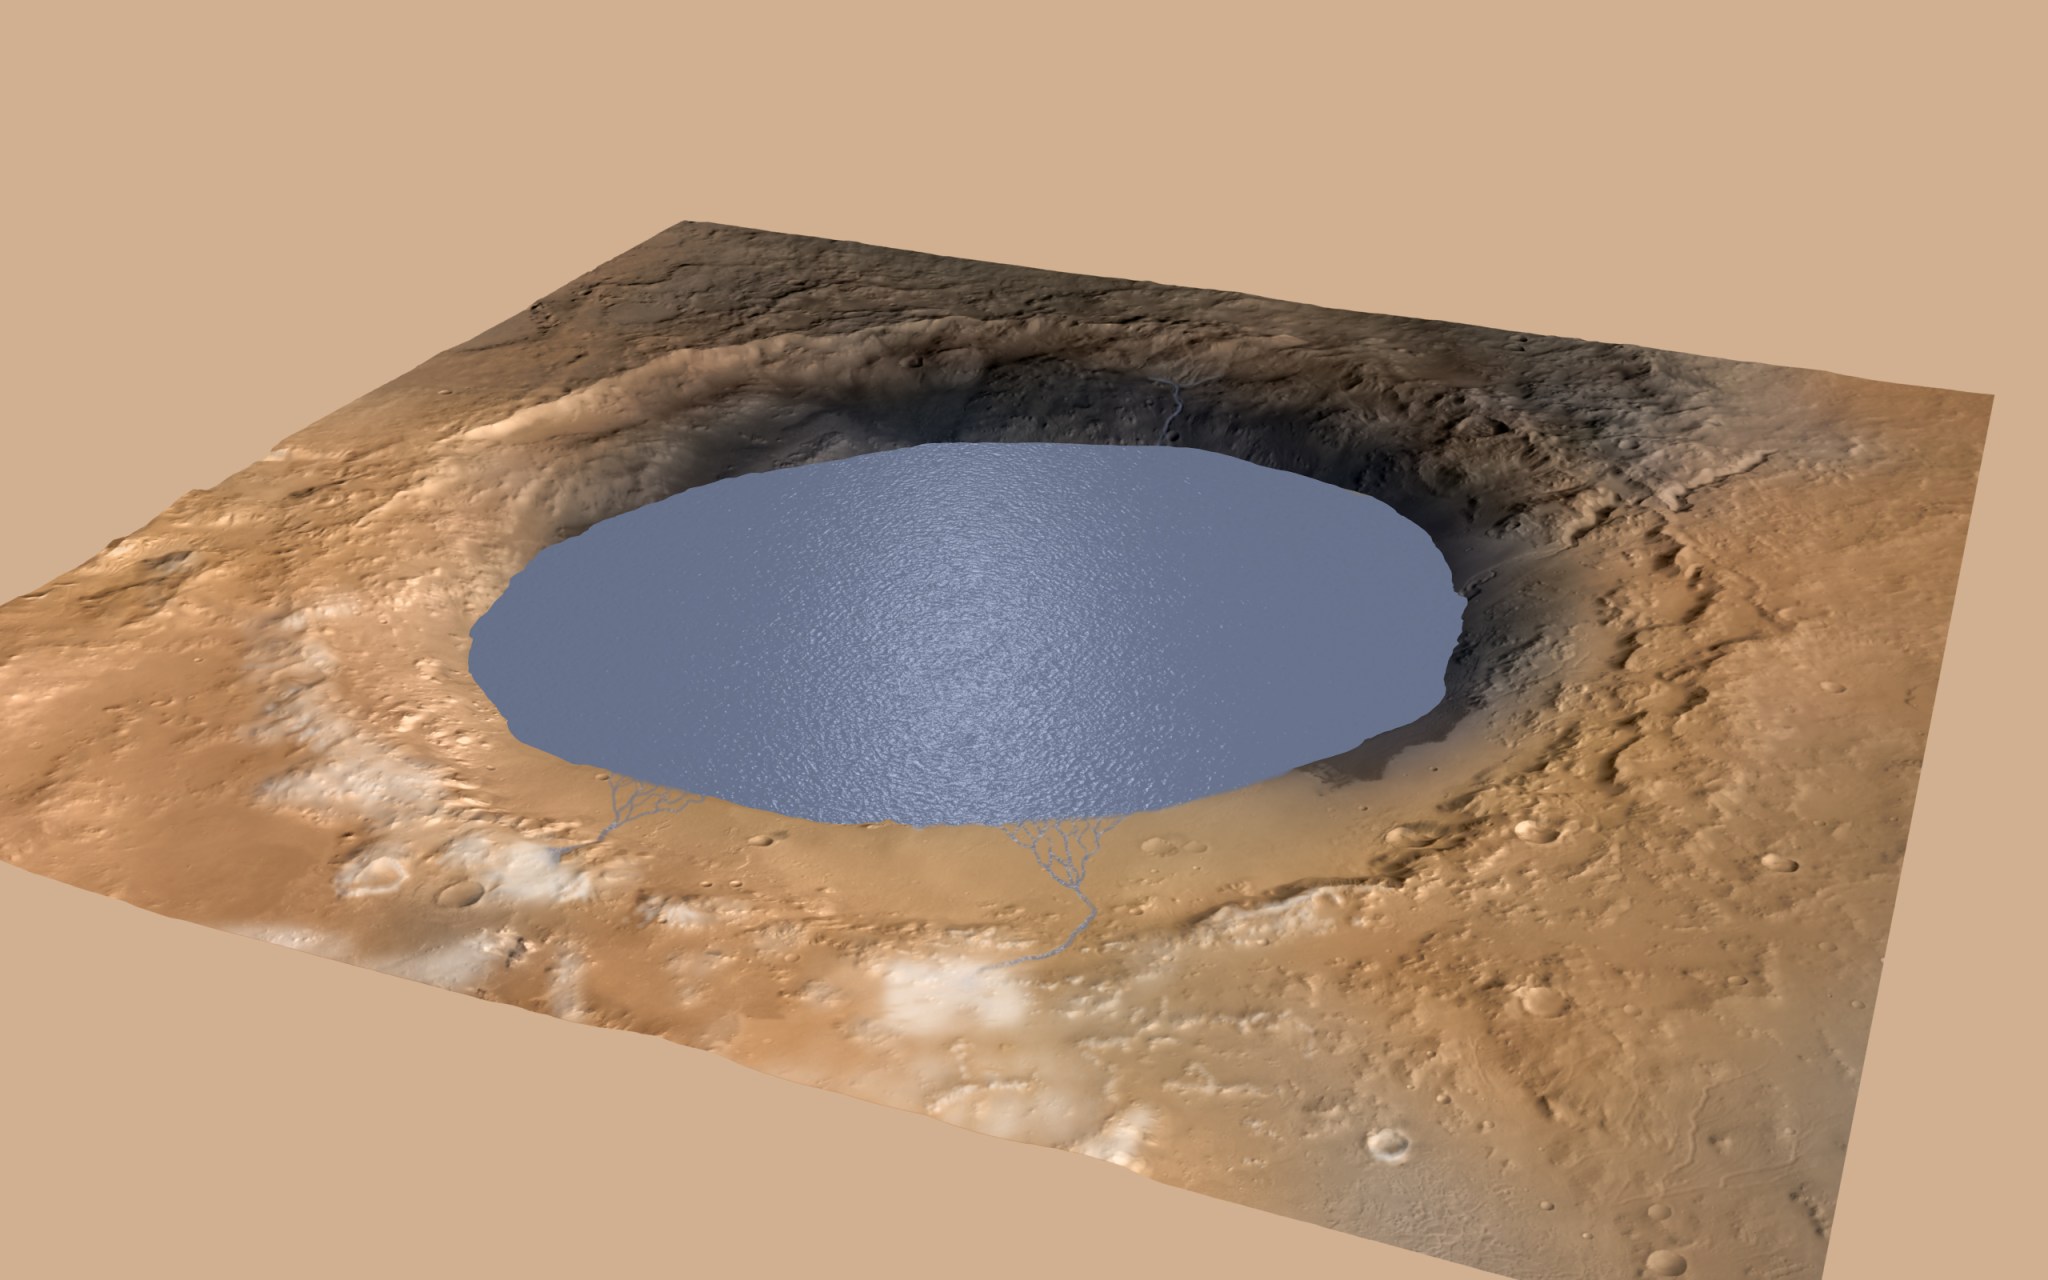 Illustration depicting a lake of water partially filling Mars' Gale Crater